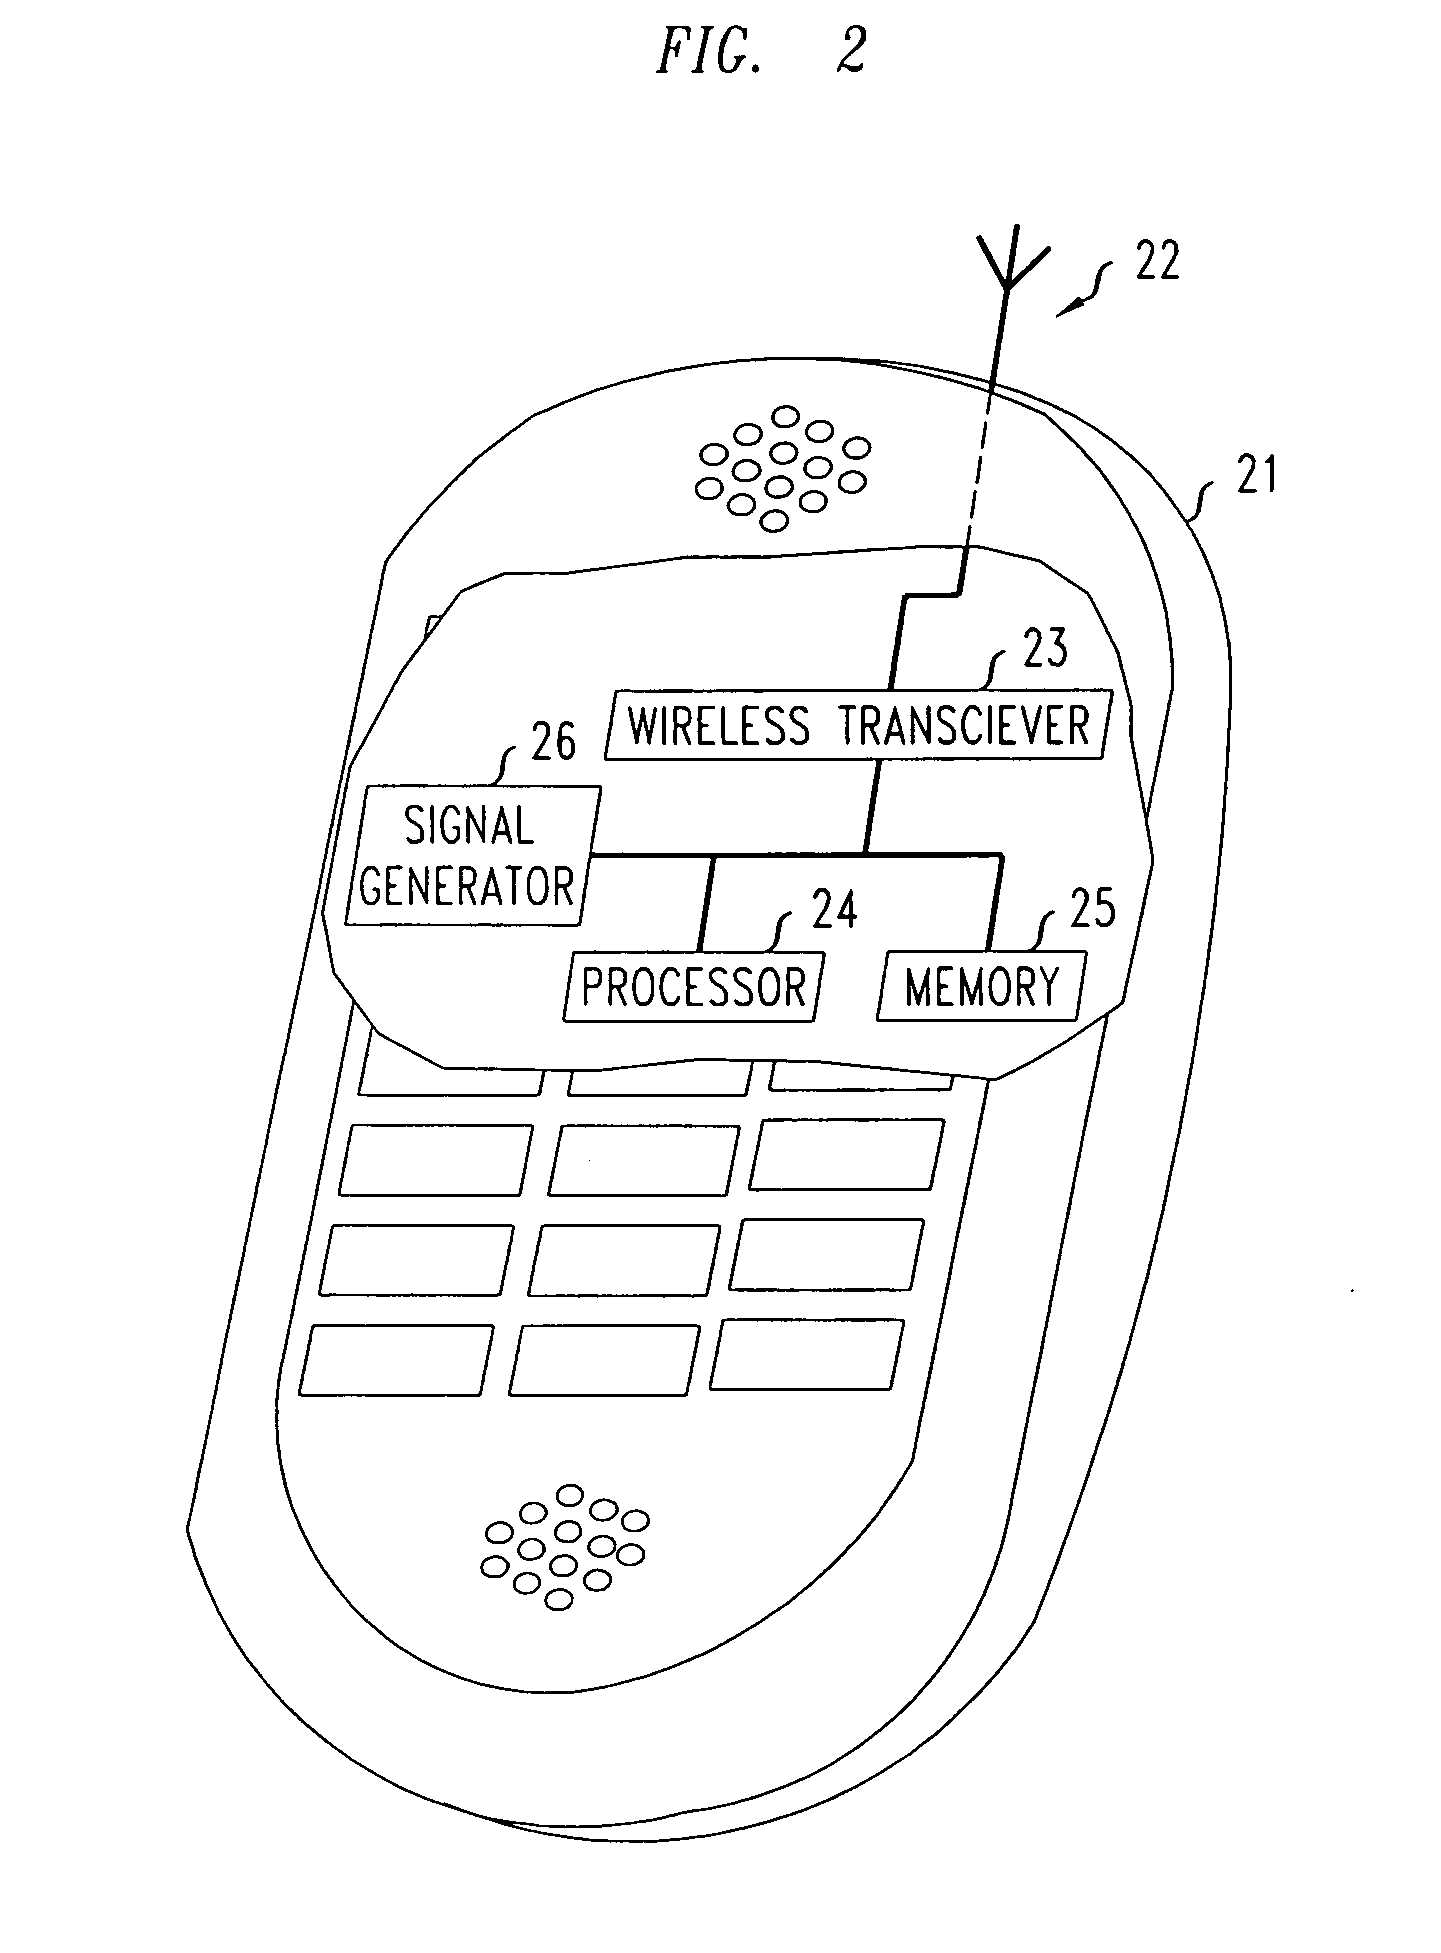 Method and apparatus for alerting mobile telephone call participants that a vehicle's driver is occupied